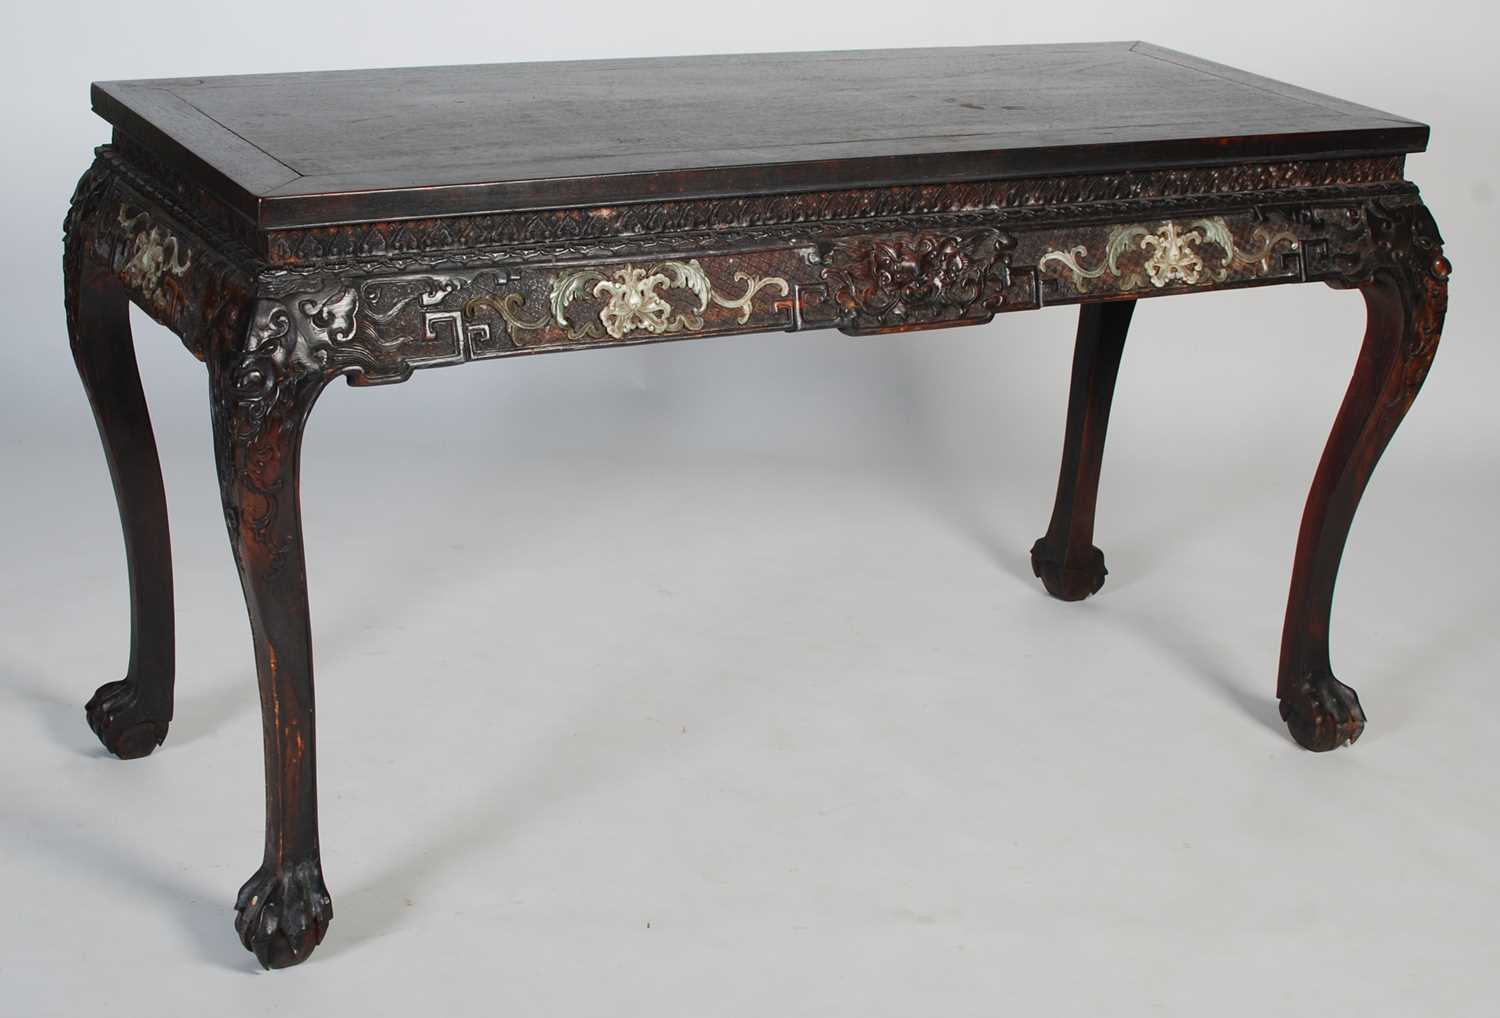 A Chinese dark wood and hardstone decorated scroll table, late 19th/ early 20th century, the